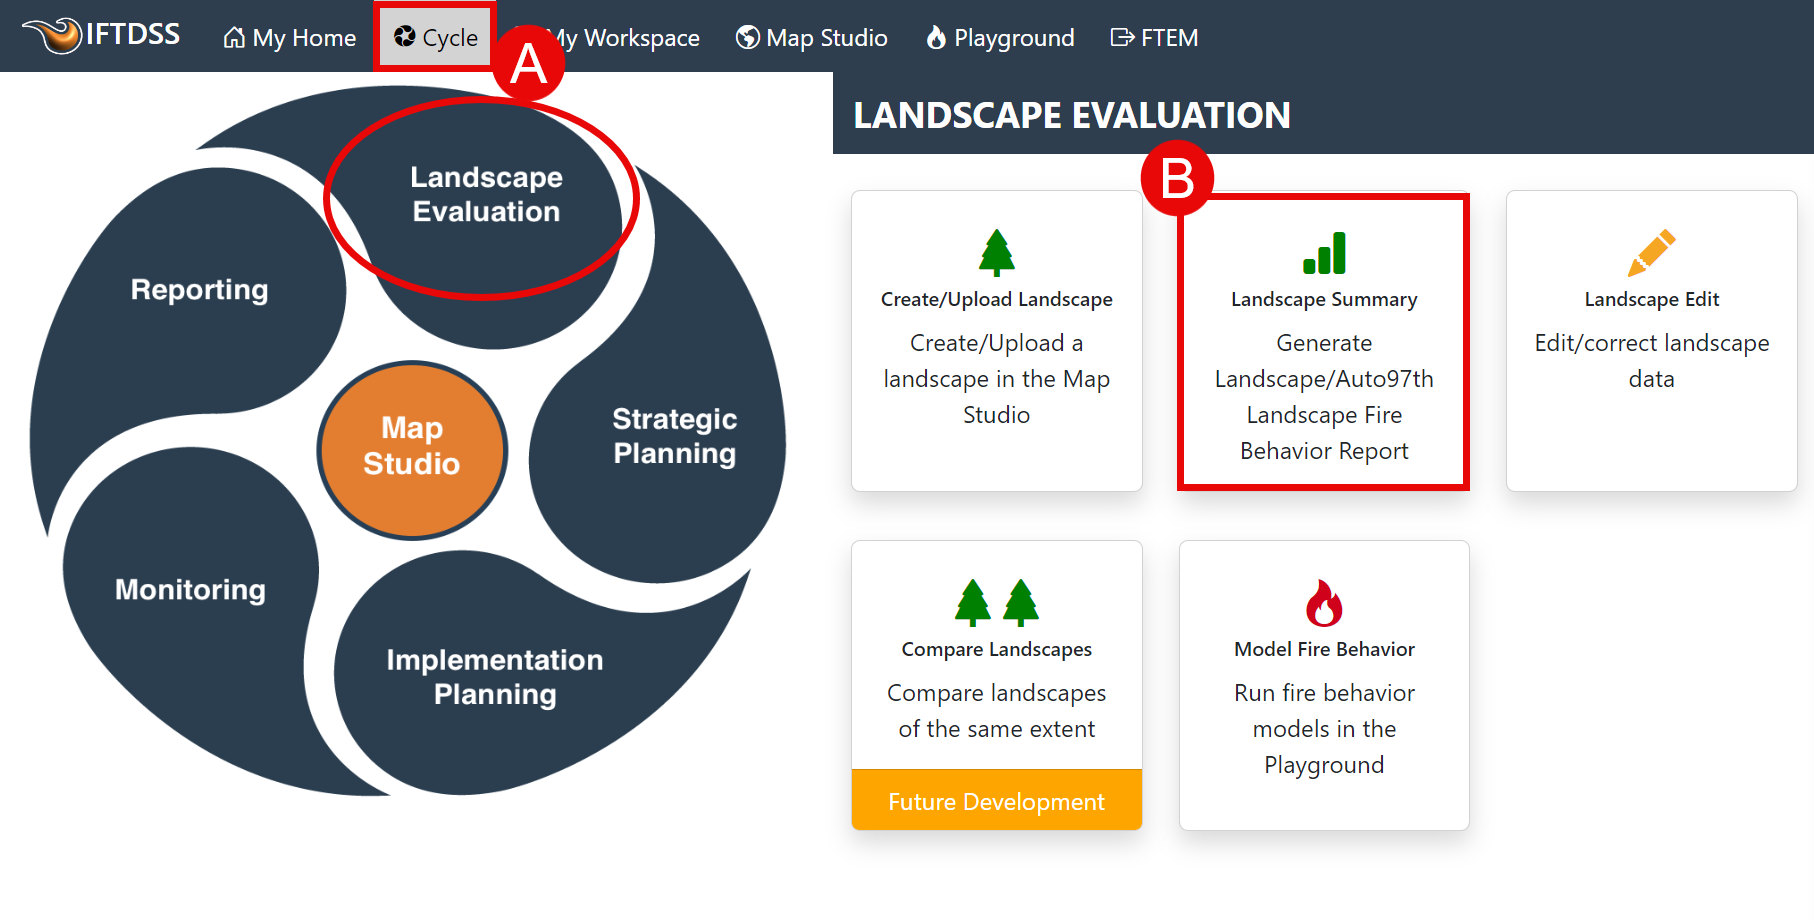 landscape summary will summarize features and auto97th fire behavior